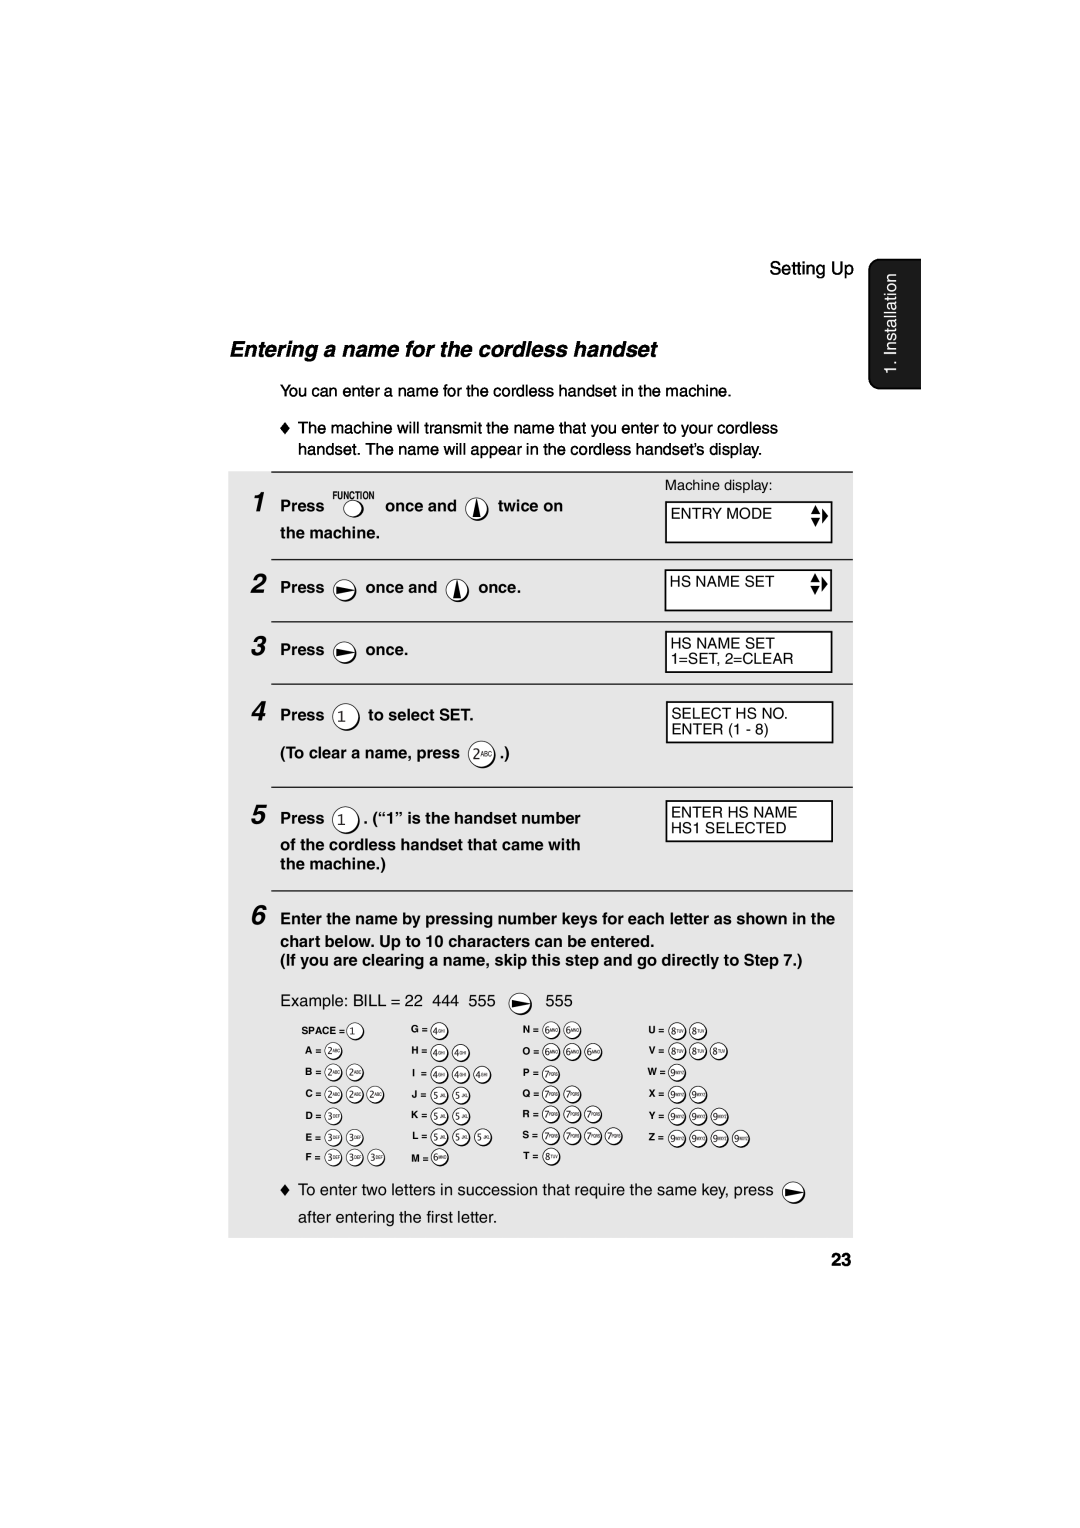 Sharp UX-CD600 operation manual Entering a name for the cordless handset, Installation 